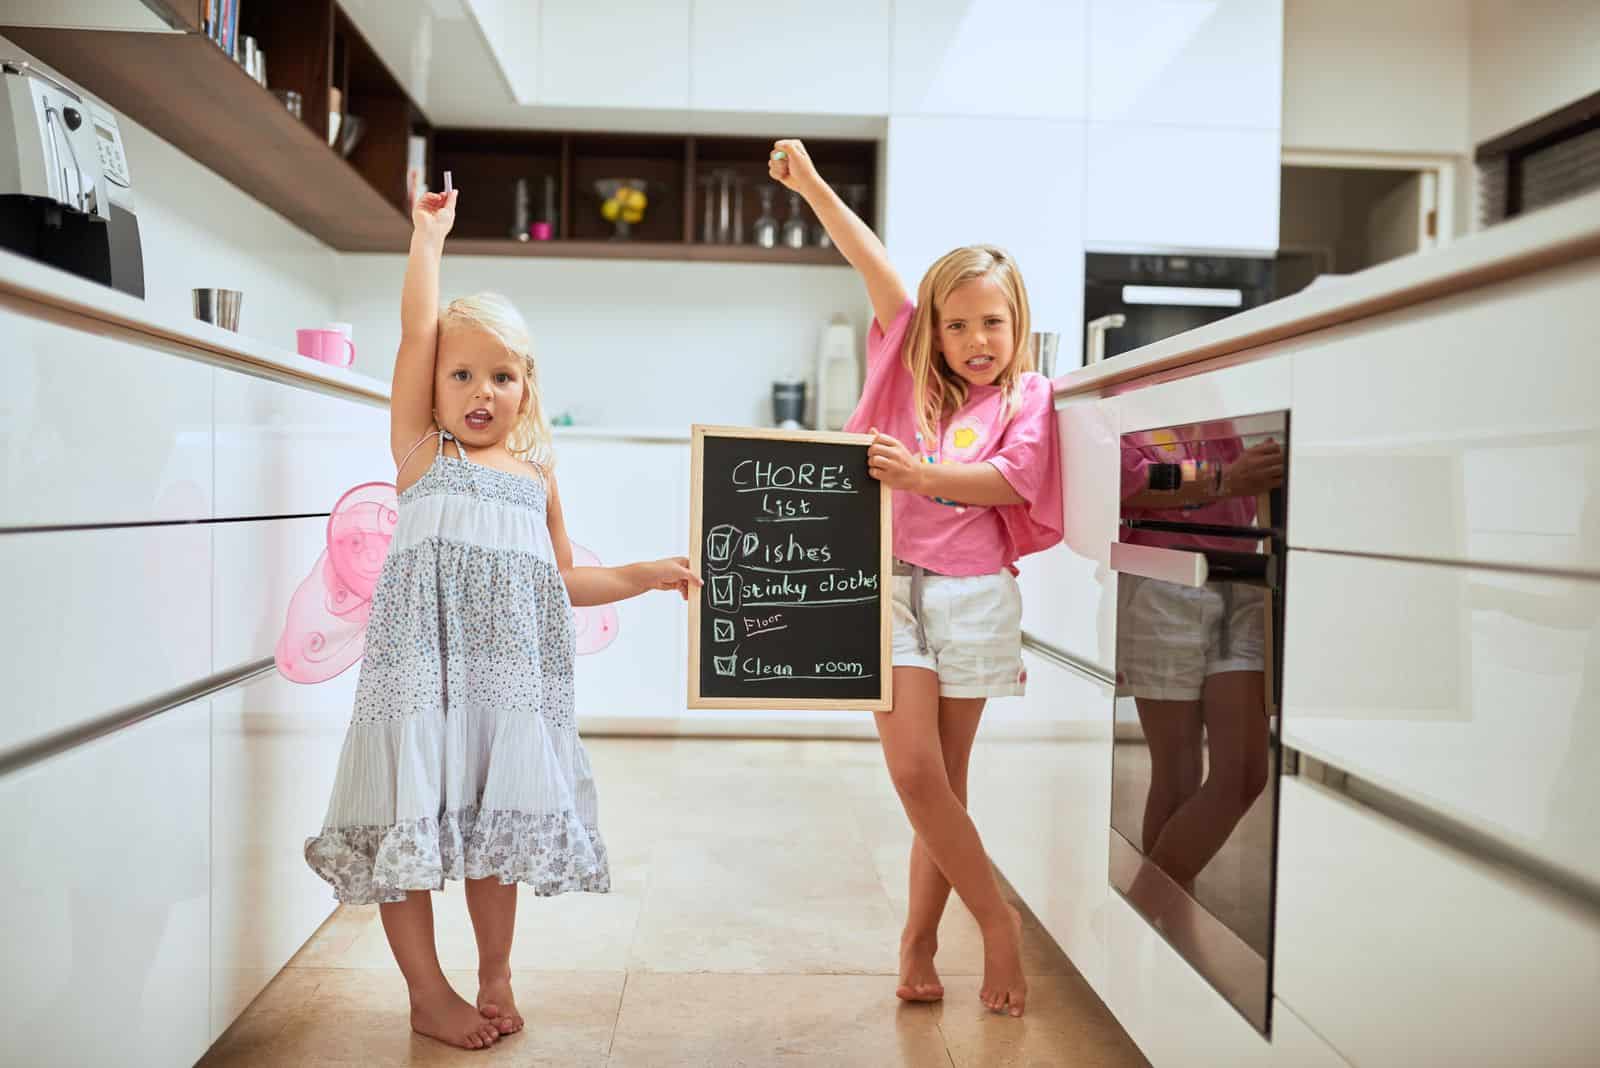 Two little girls standing in a kitchen holding a chalkboard.